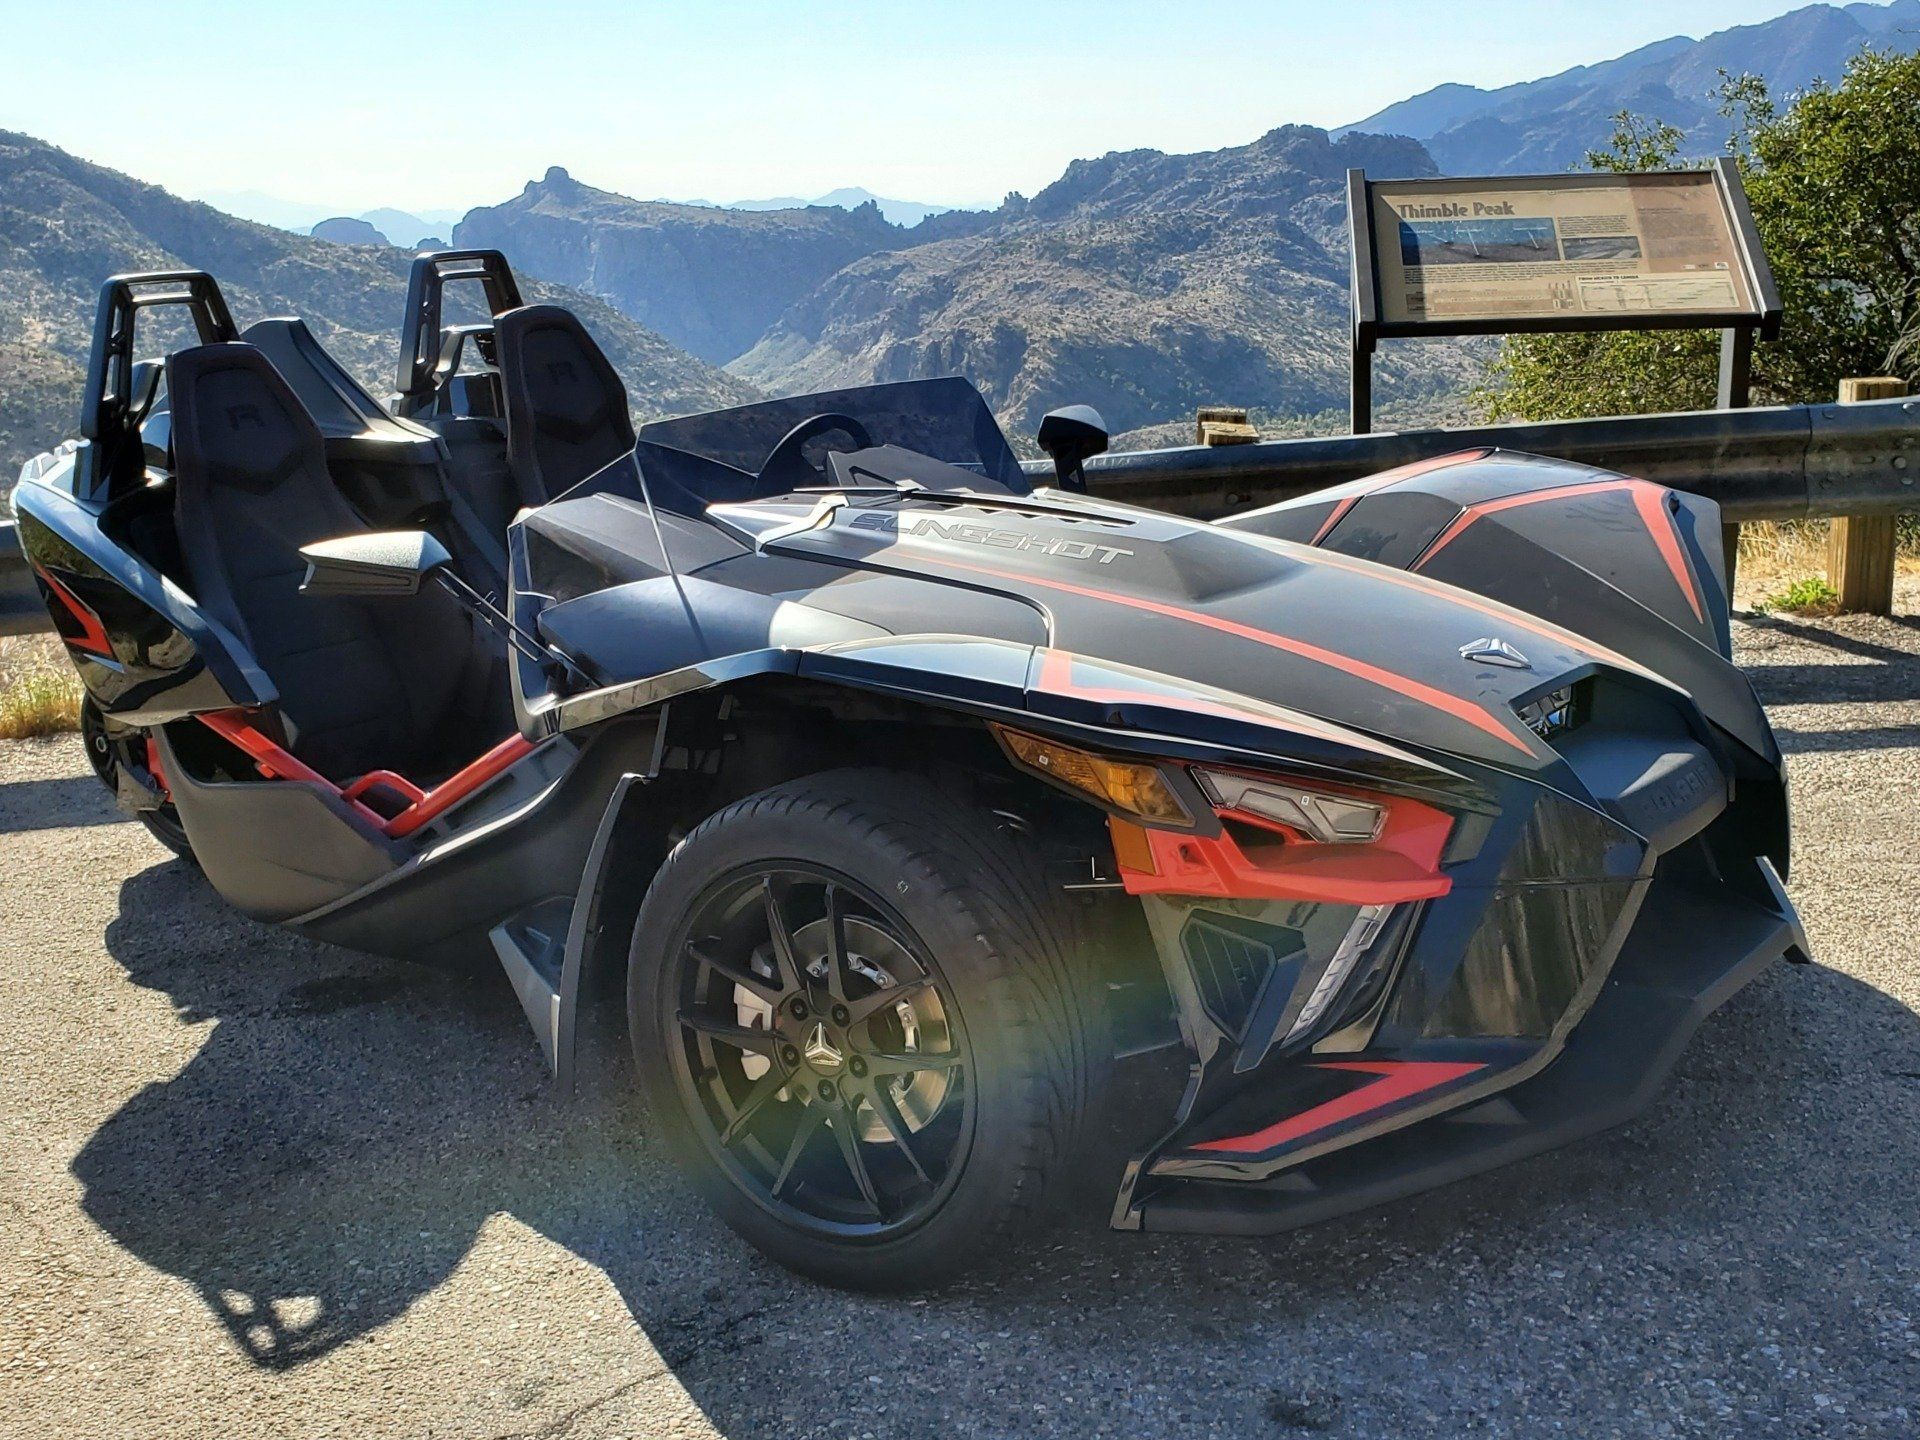 Polaris Slingshot from Tucson Adventure Rentals Parked at Lookout